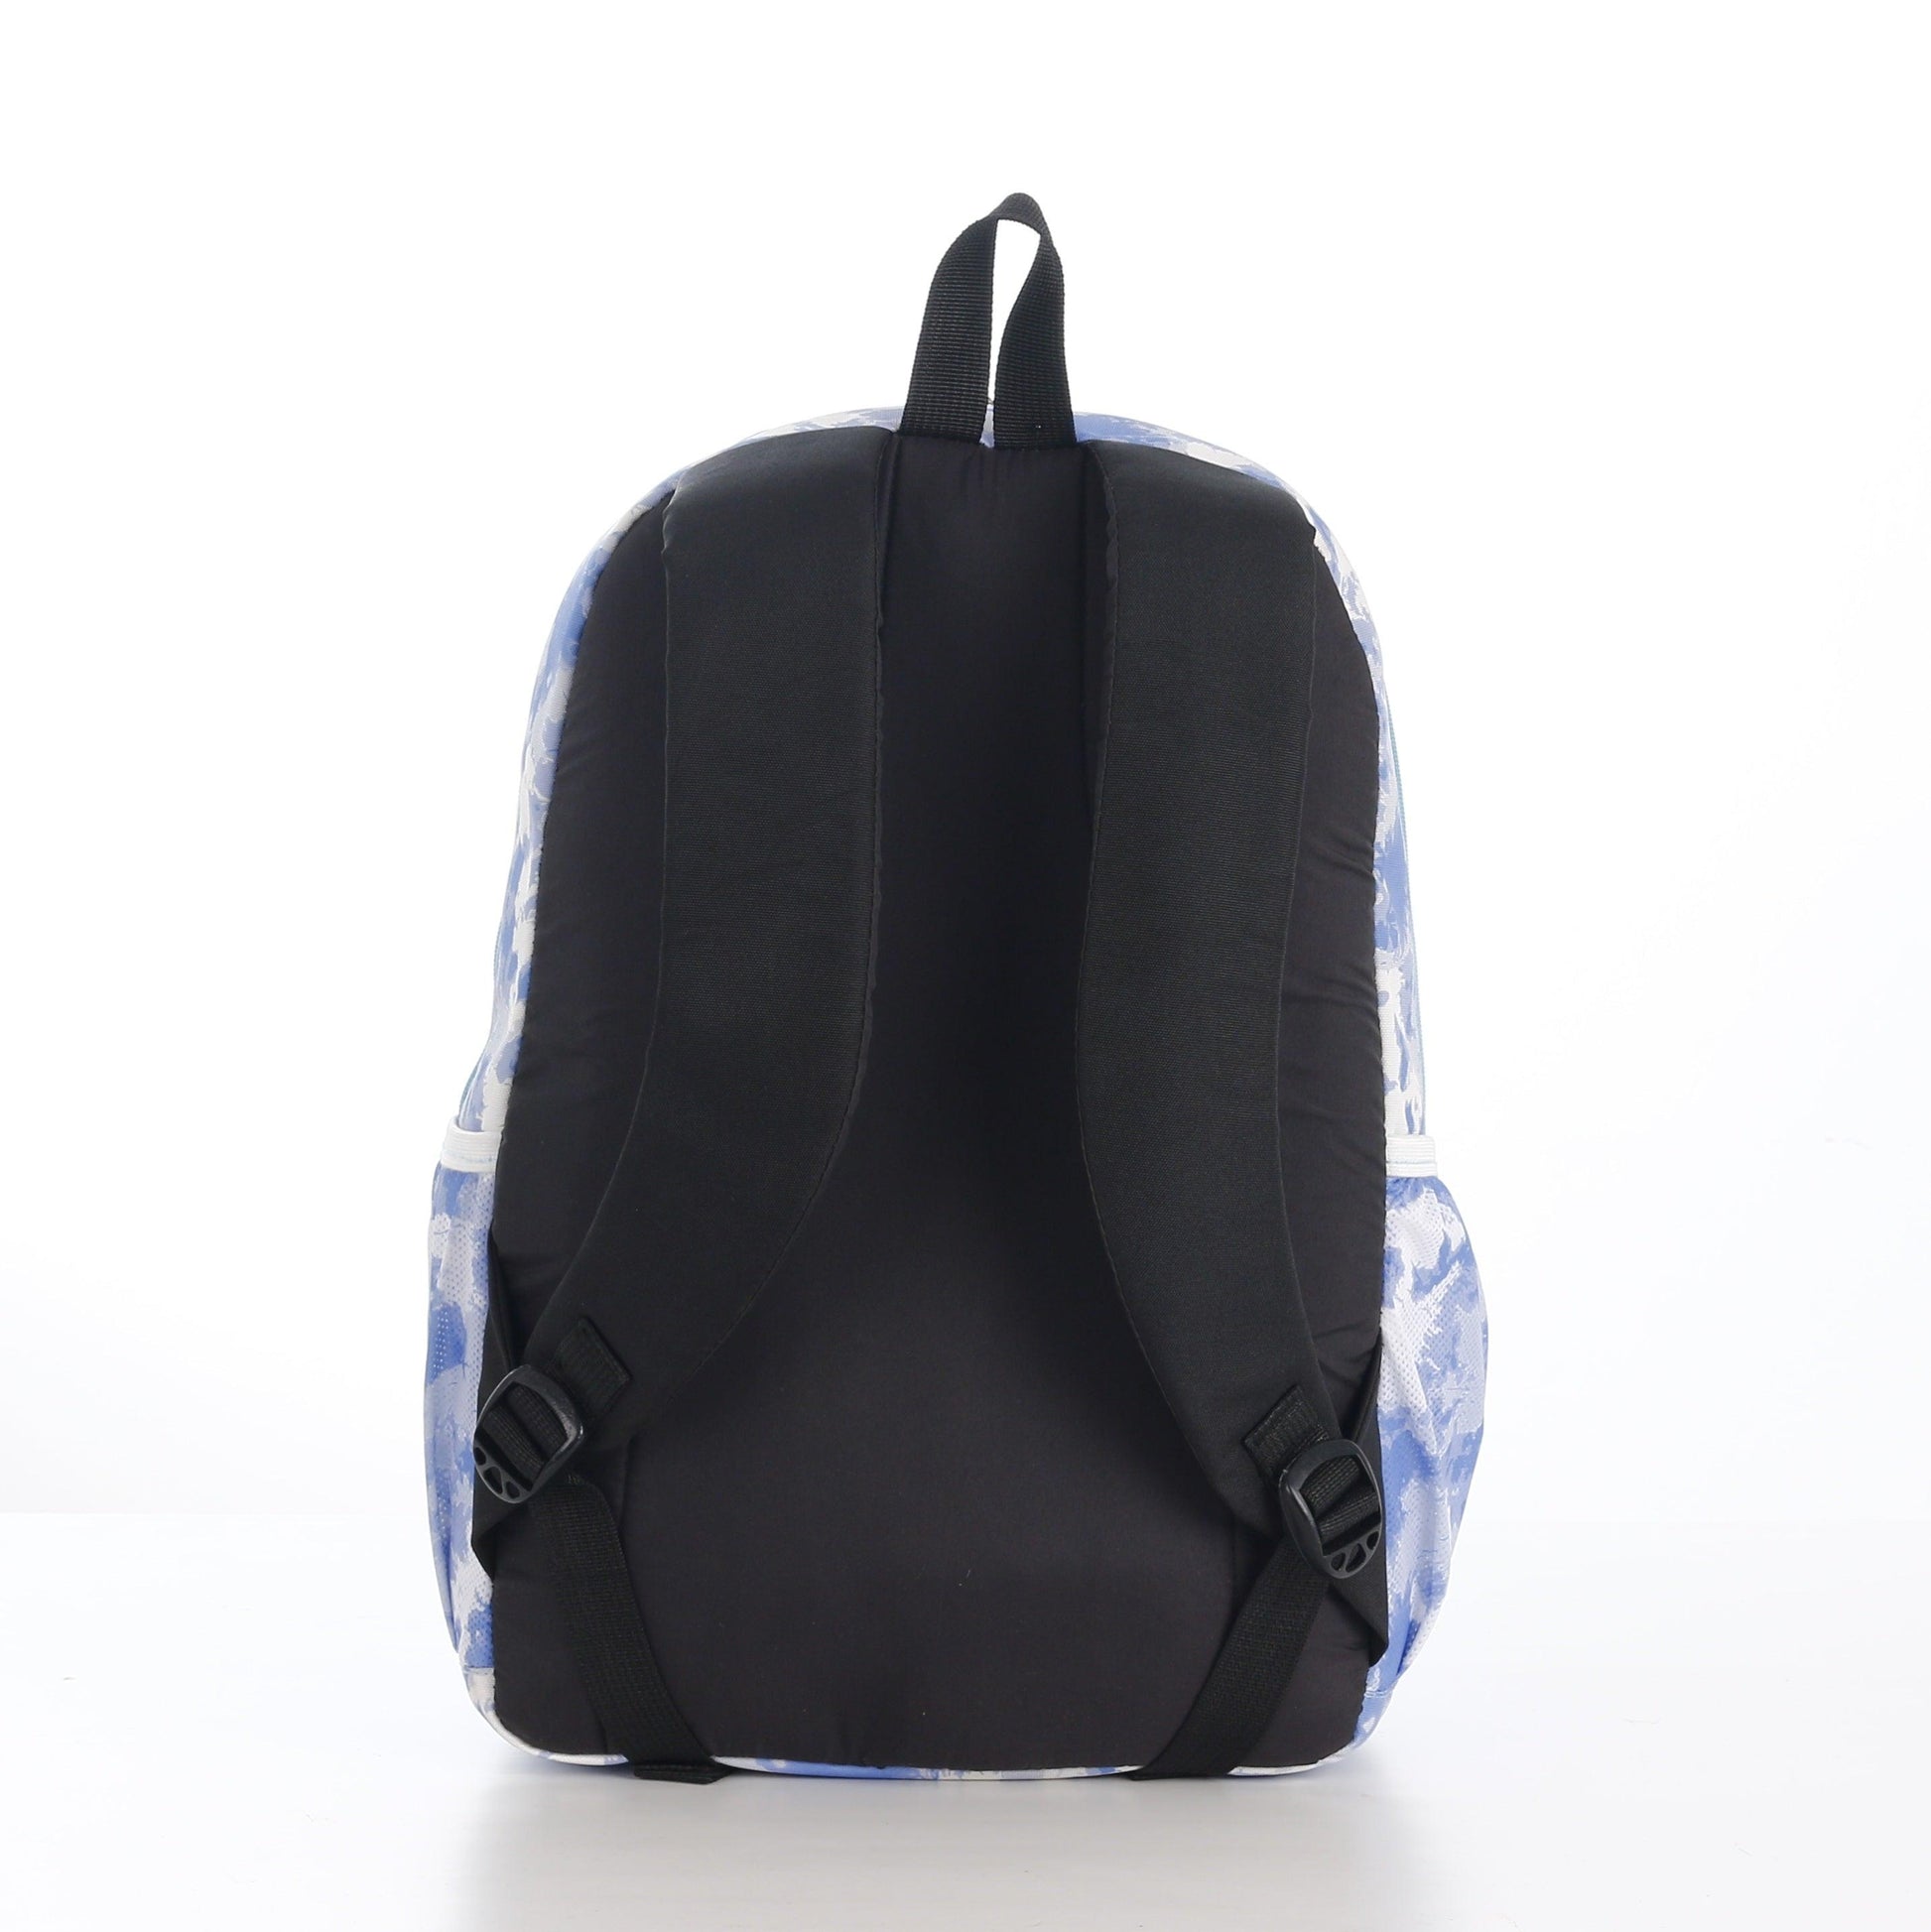 Force Backpack Unisex -Sky colors pattern - new edition - FNE-004 - FORCE STORES